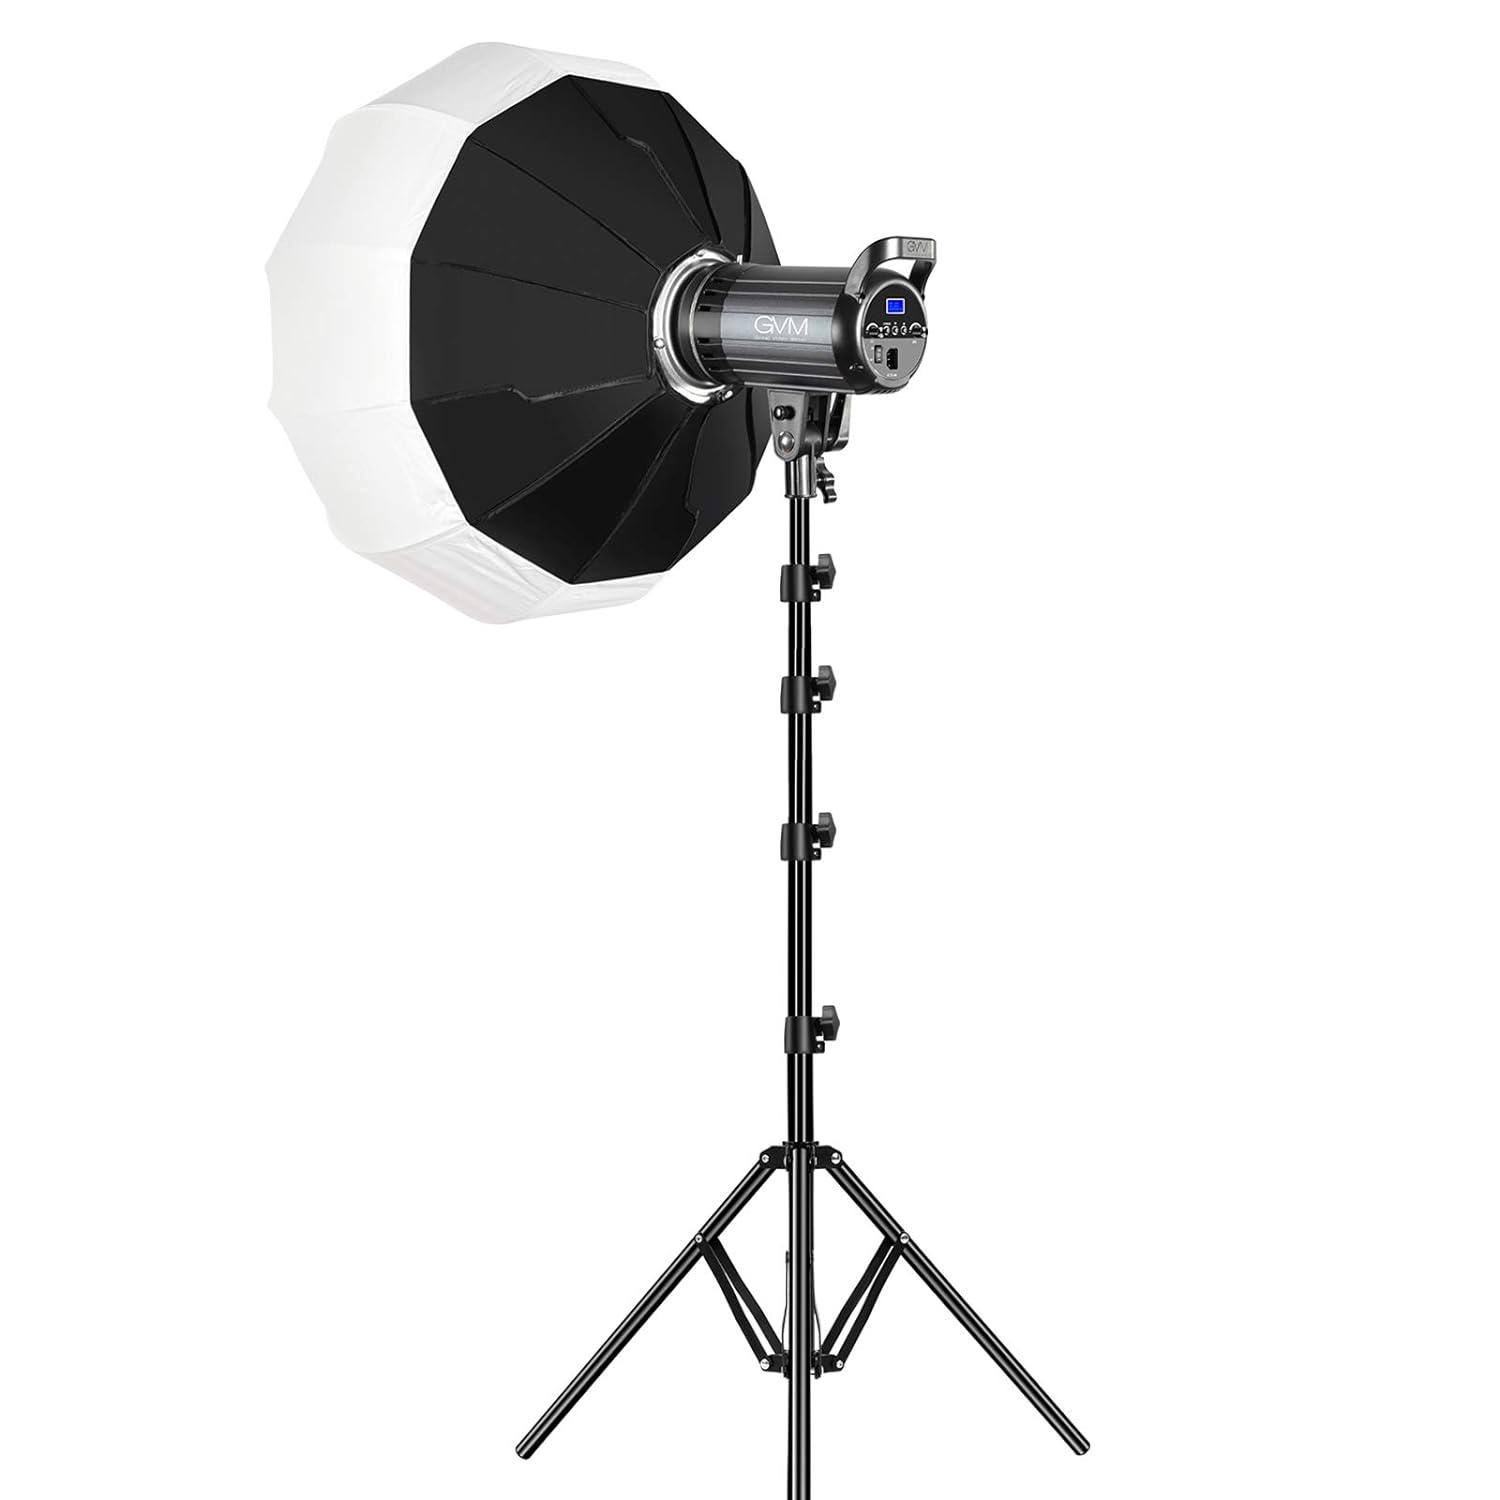 Zell Electronics Zell Bi-Color Led Video Light, Gvm 100W Photography Lighting With Bowens Mount, App Control System, Lantern Softbox Video Lig…